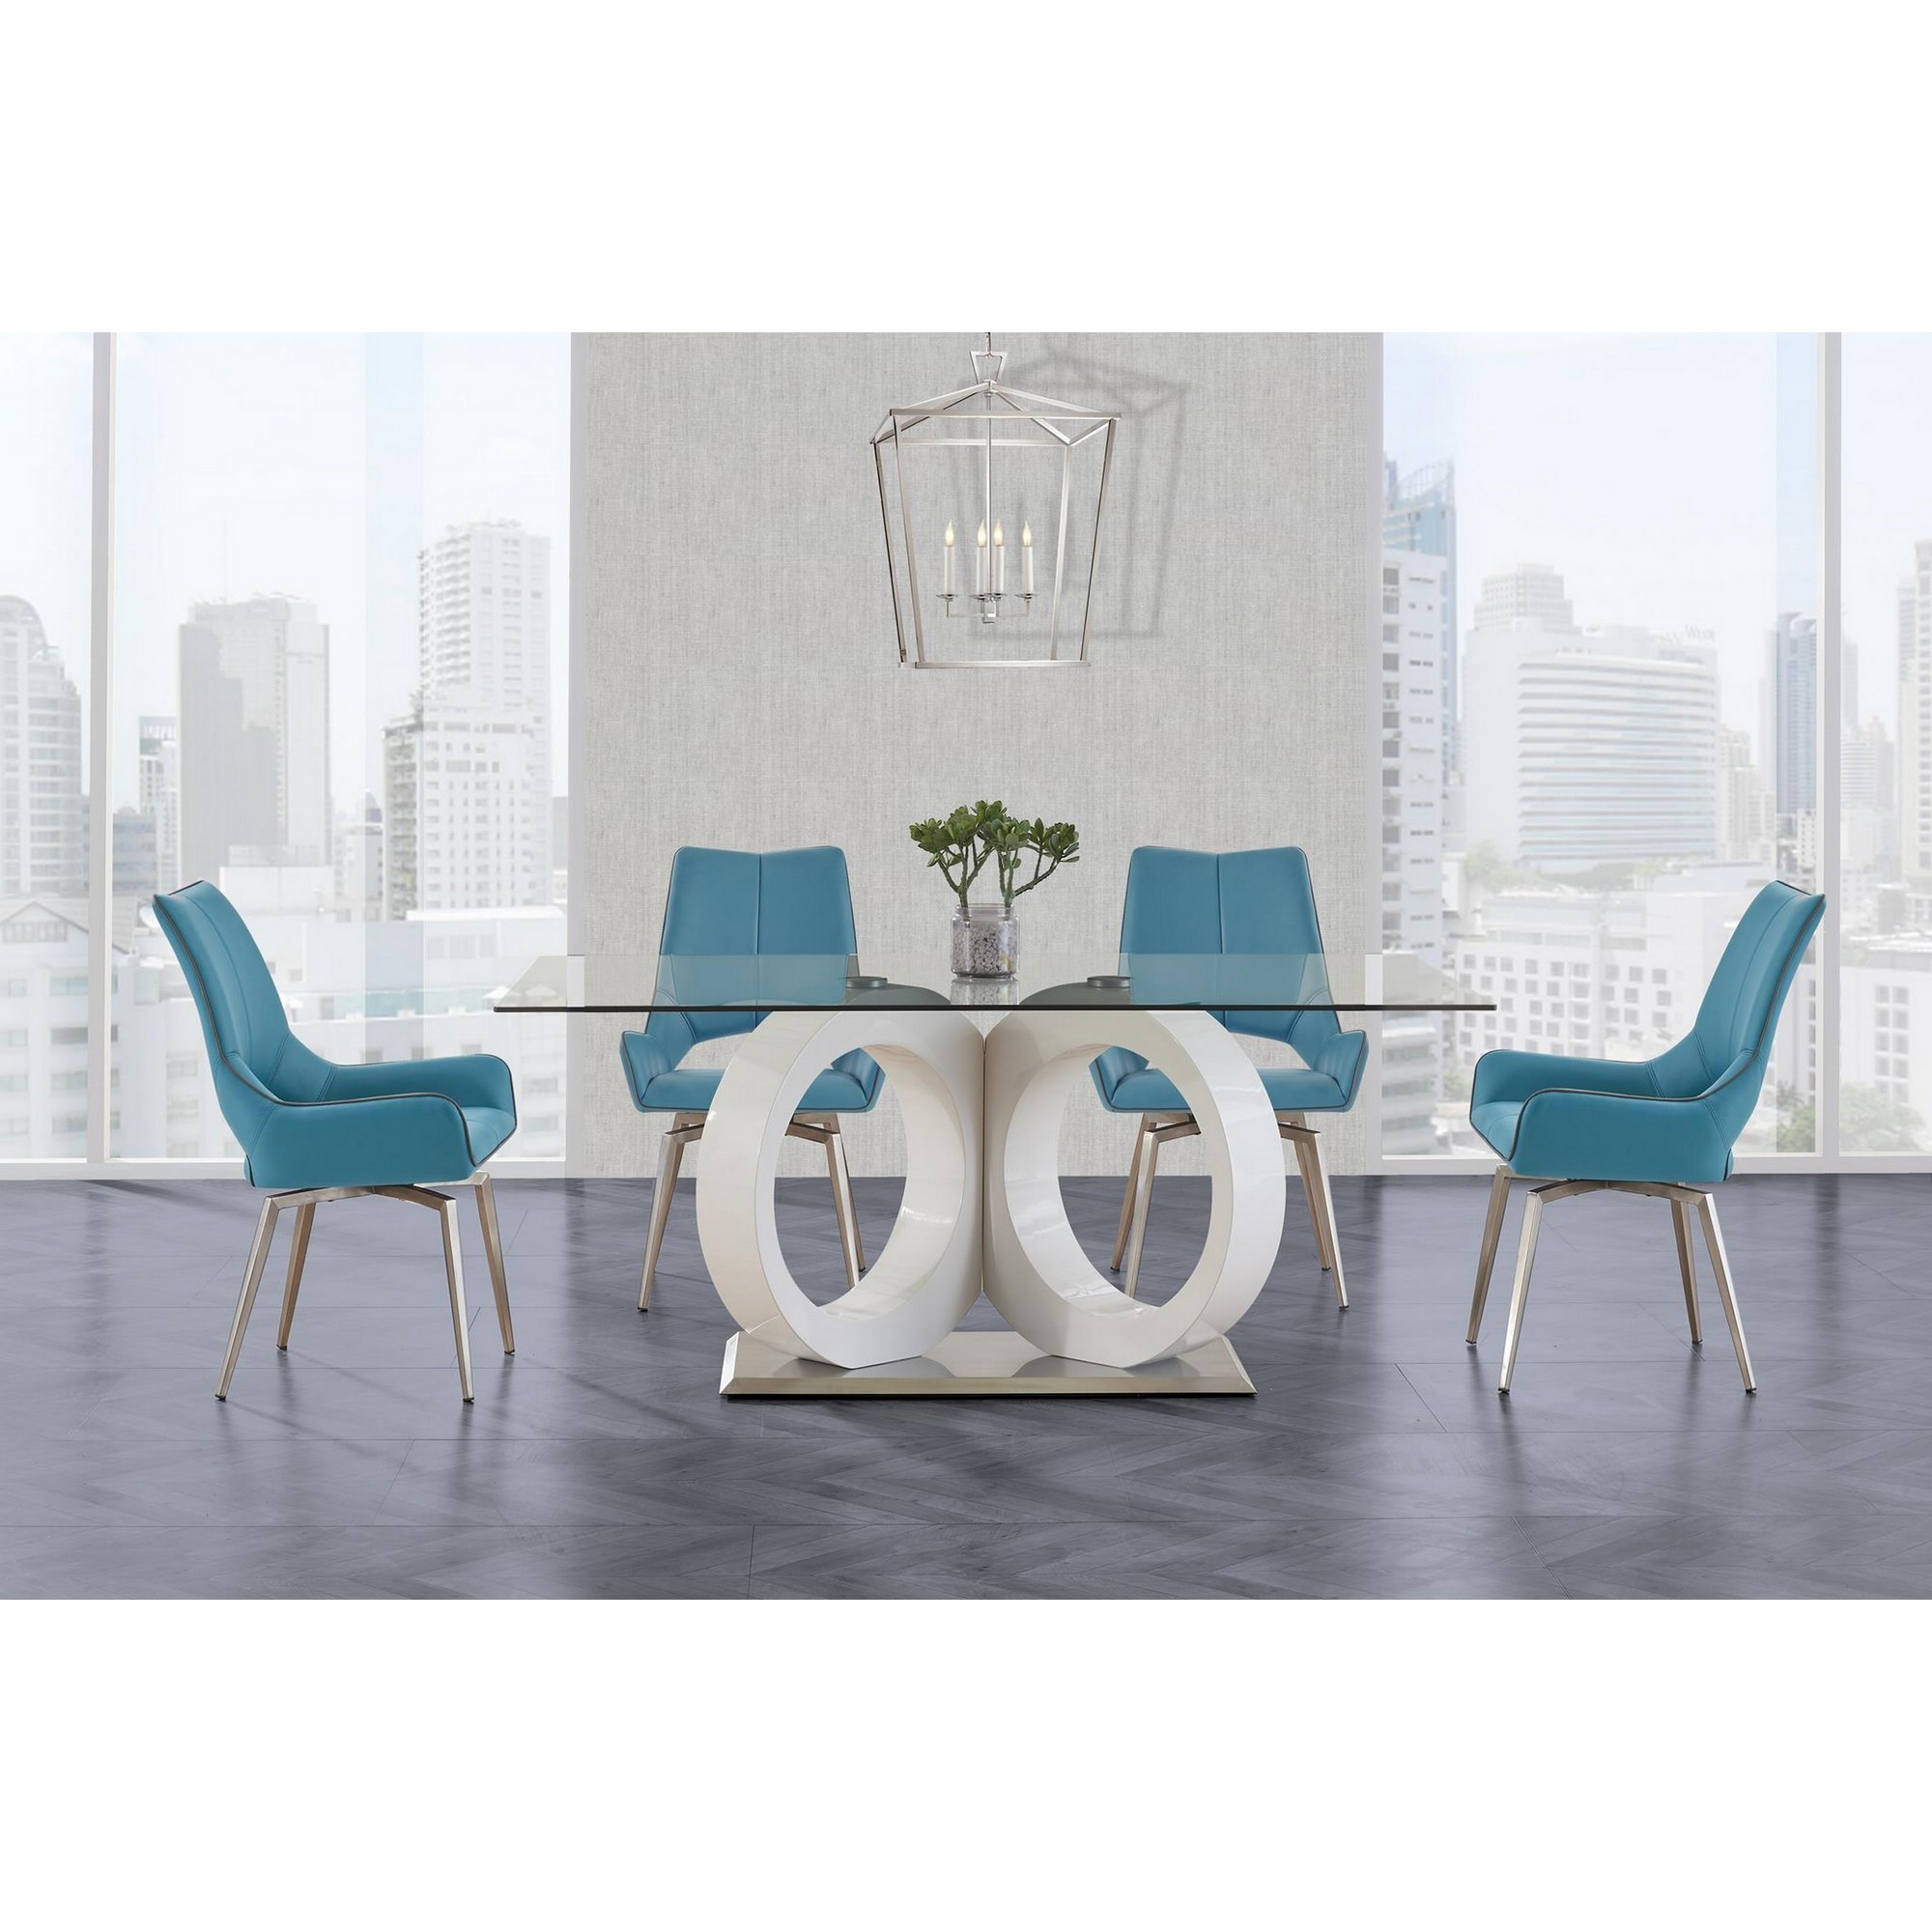 Homeroots Kitchen & Dining Set Of 2 Turqouise Bucket Style Dining Chairs With Metalic Silver Base